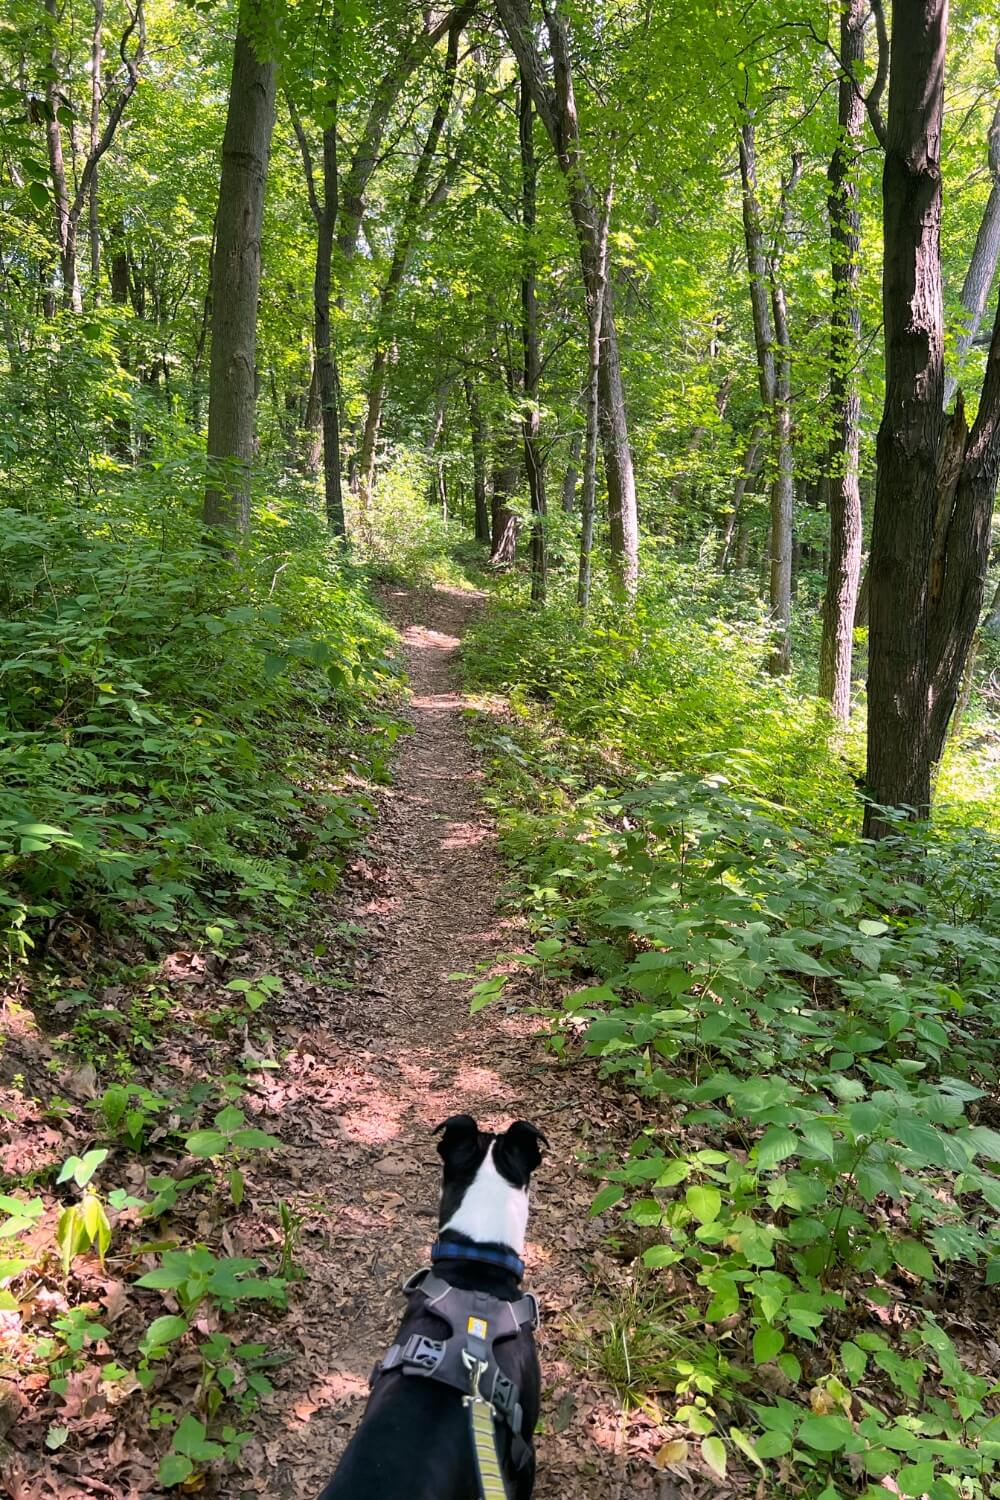 Hiking through the forest with my dog at Northwest Community Park in Eau Claire.